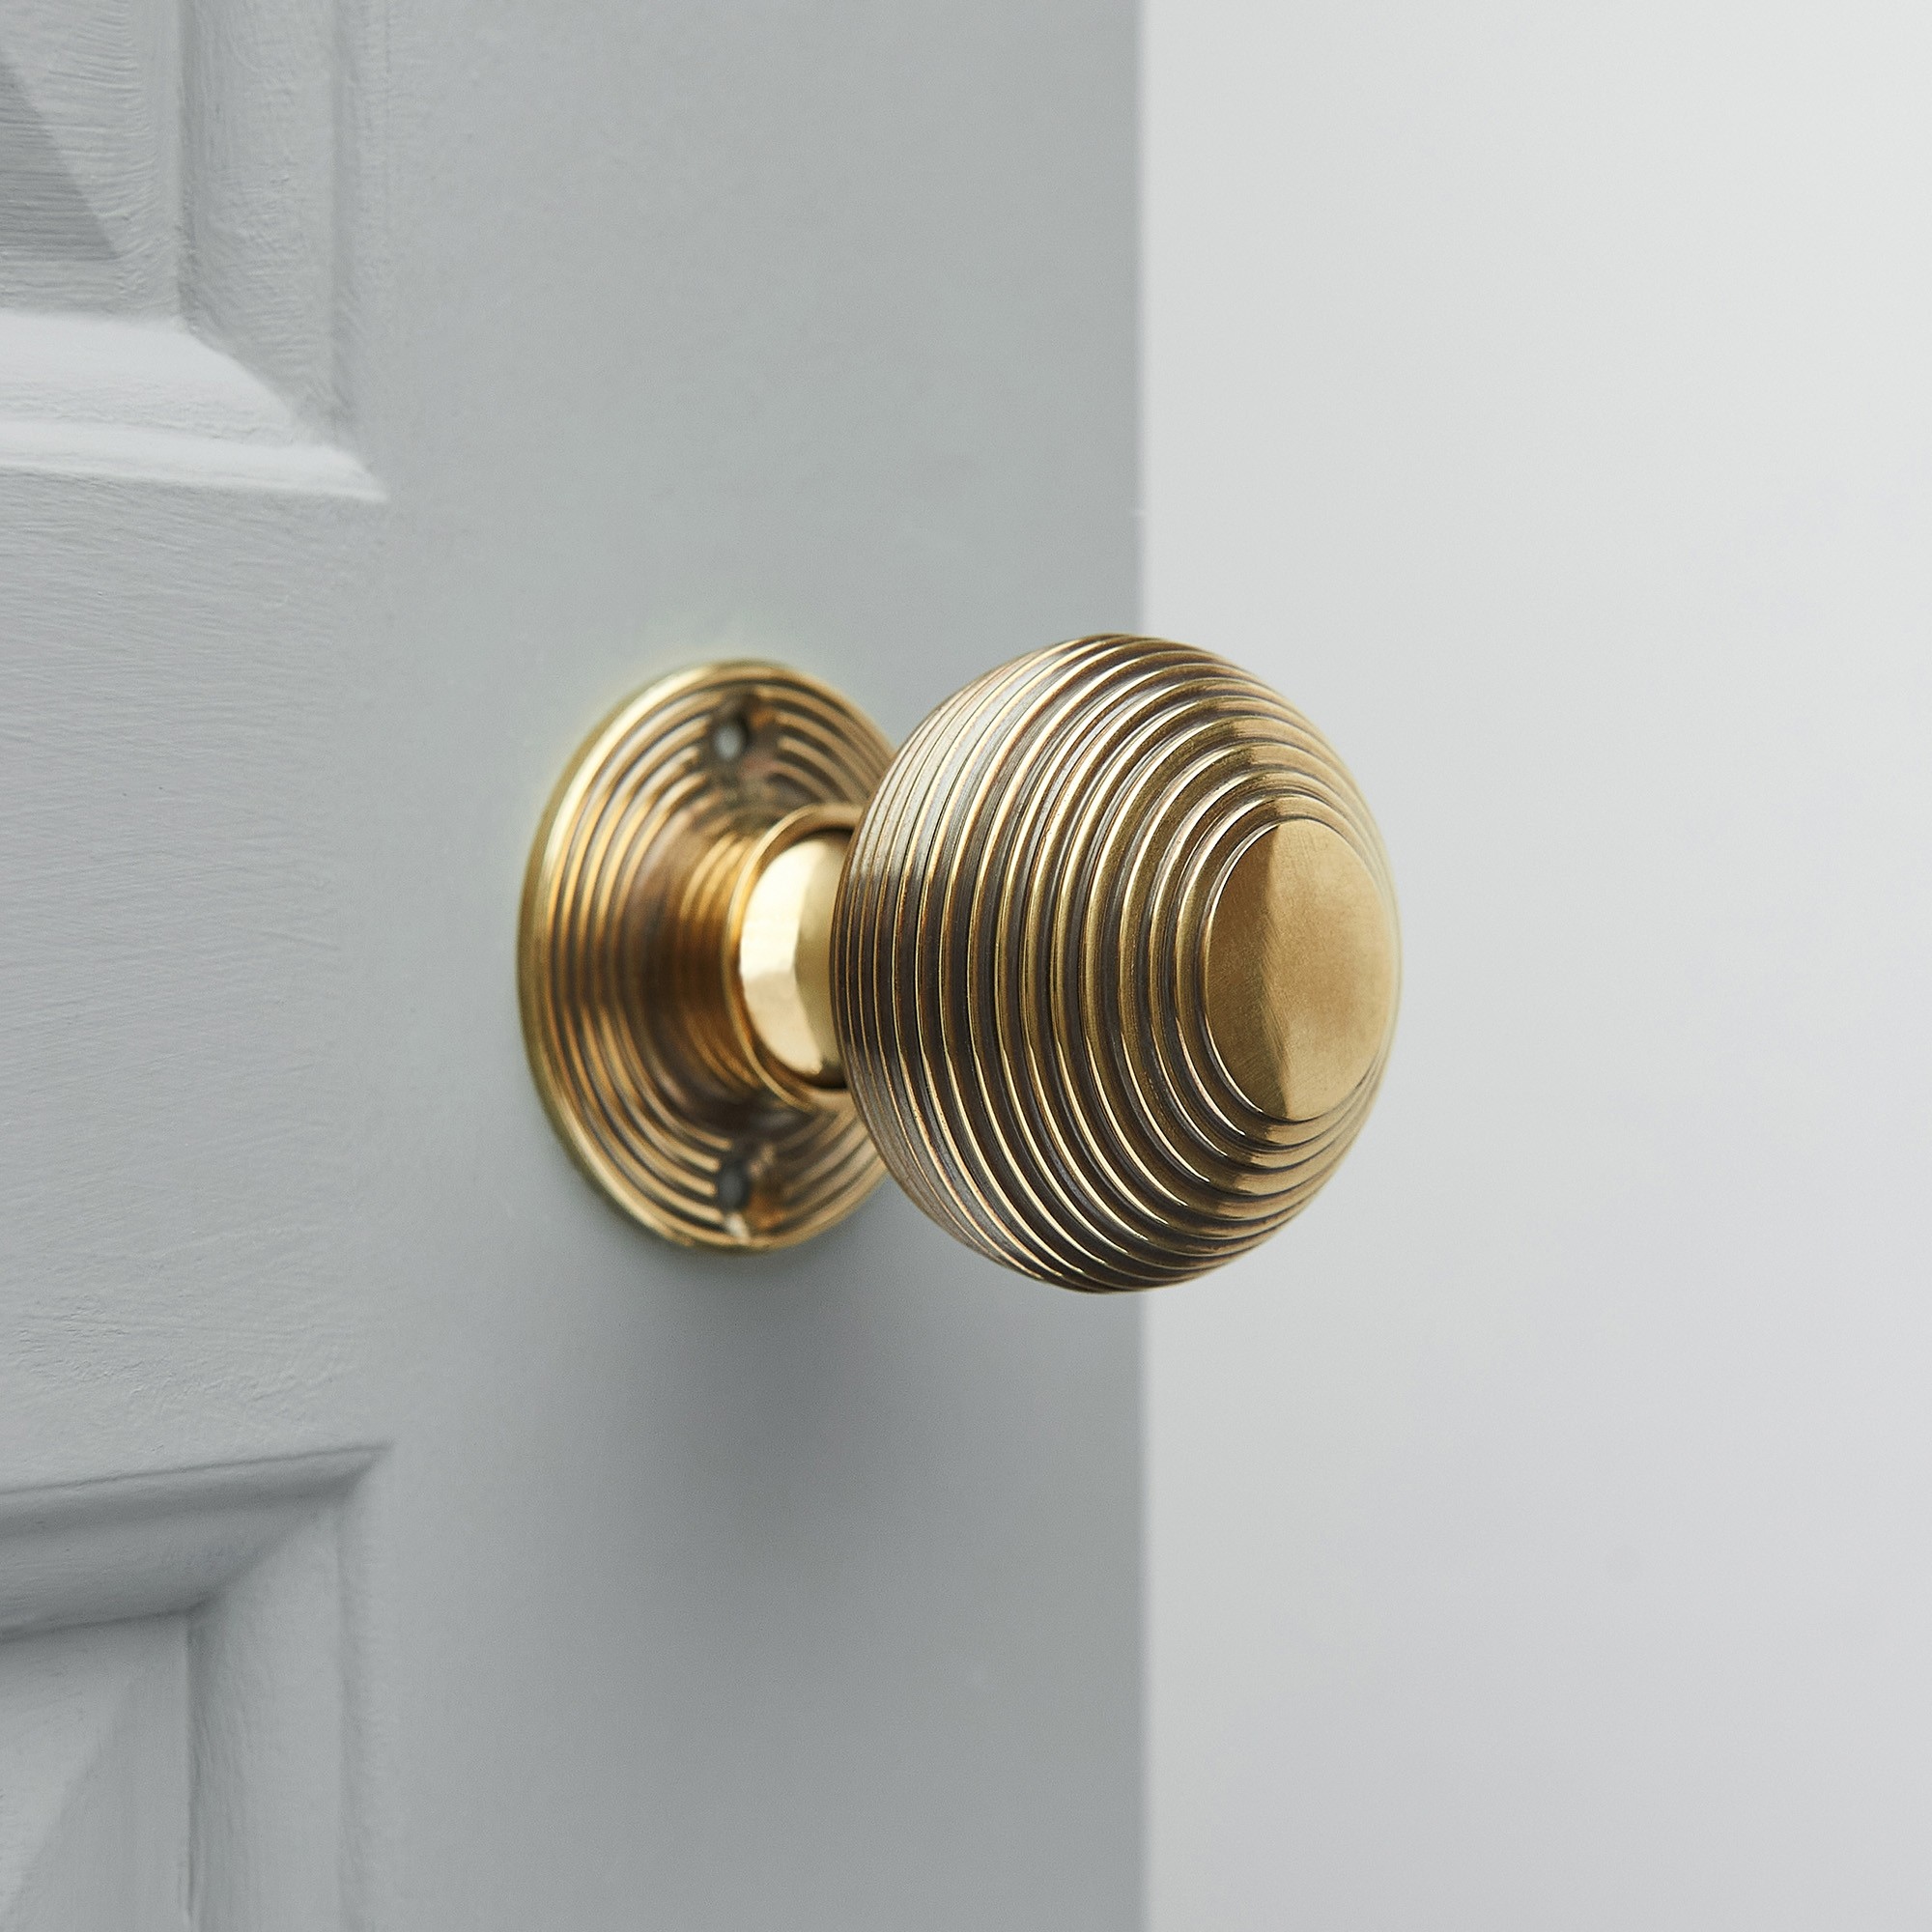 Beehive Door Knobs in Aged Brass - Grace & Glory Home